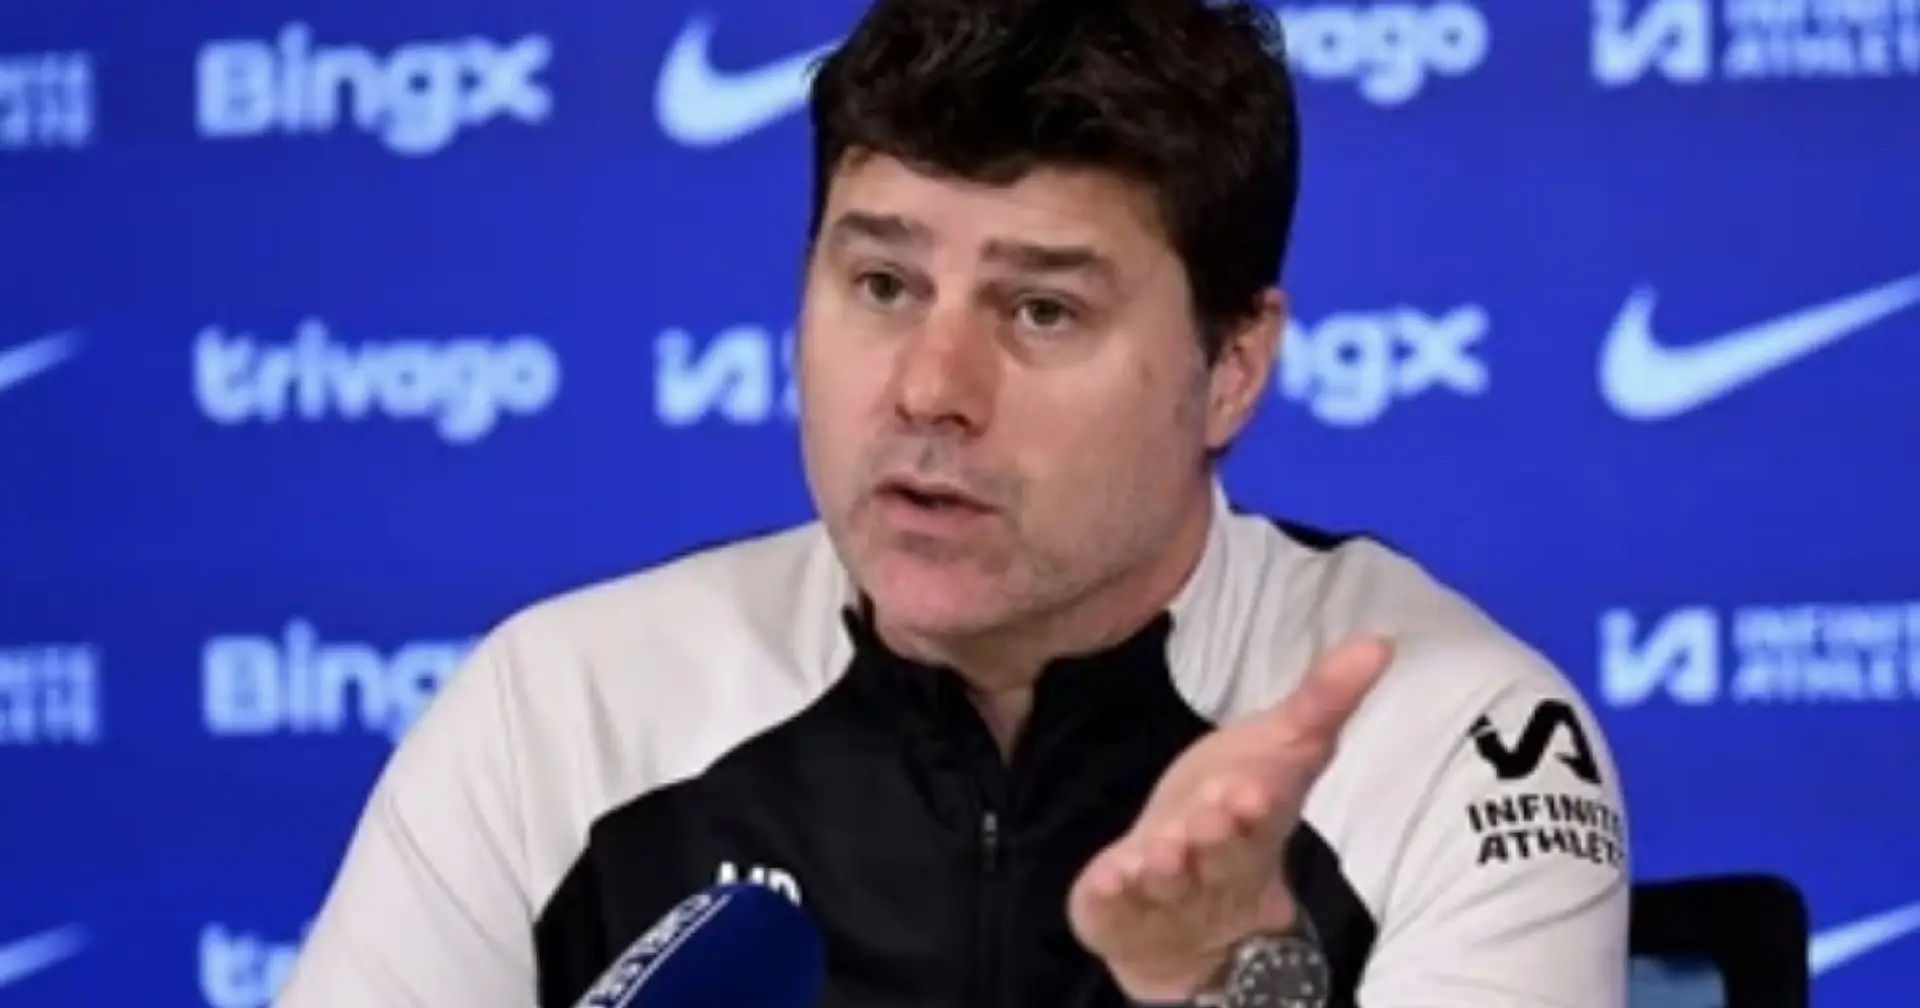 'Data says we're doing well': Pochettino reacts to 'you don't know what you're doing' chants